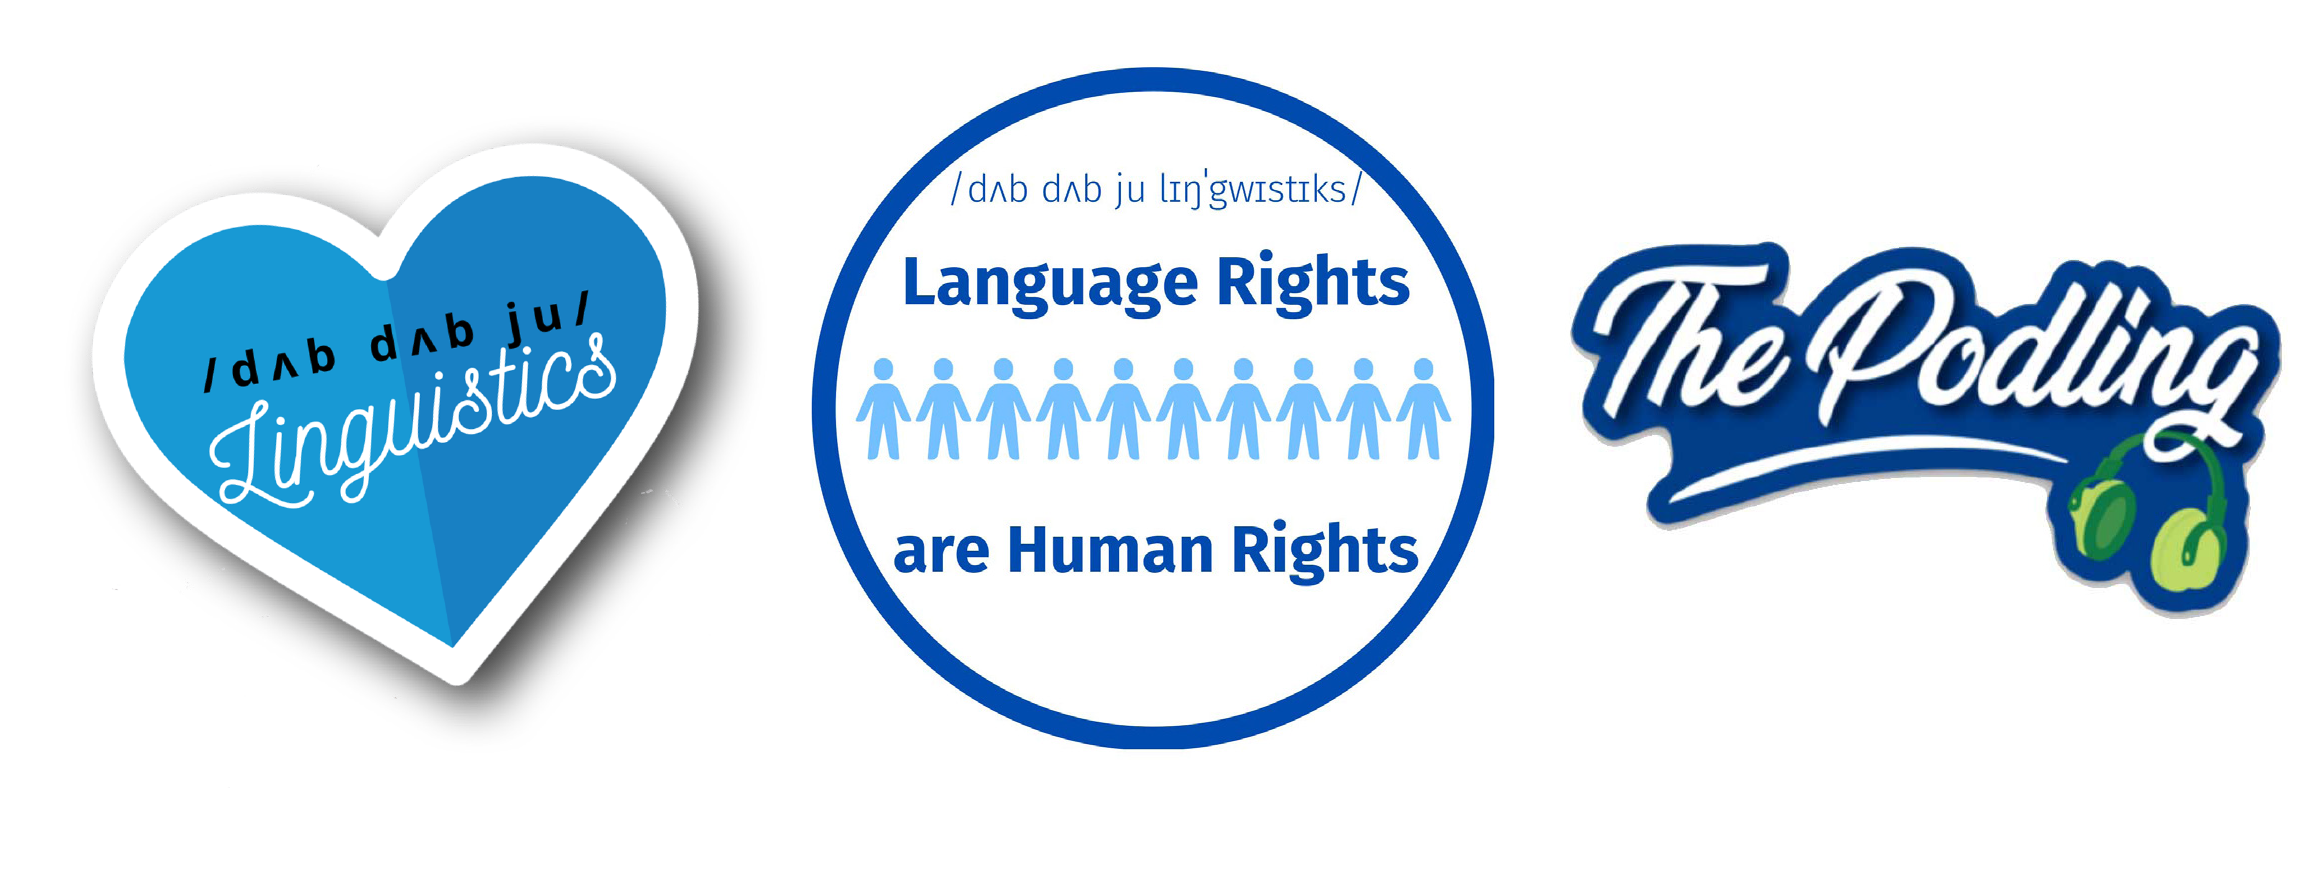 Three of our department's sticker designs. From left, heart shaped sticker that says, "/dʌb dʌb ju/ Linguistics"; Circle shaped sticker that says, "/dʌb dʌb ju/ linguistics; Language Rights are Human Rights." Shows figures of people standing in a row seeming to hold hands; and The Podling logo sticker.